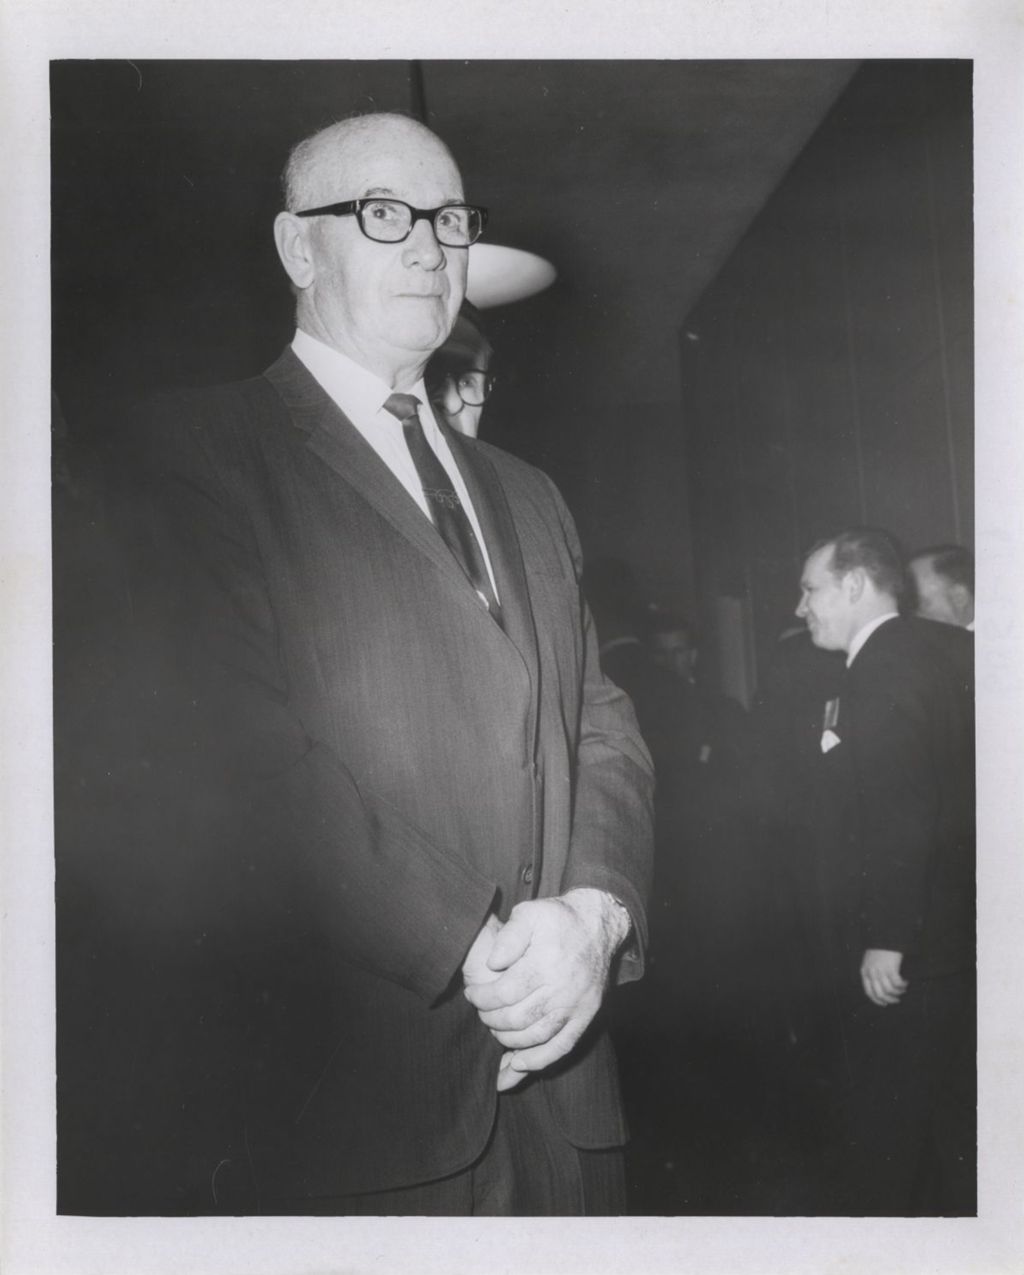 Fourth mayoral inauguration of Richard J. Daley, guest Robert Quinn